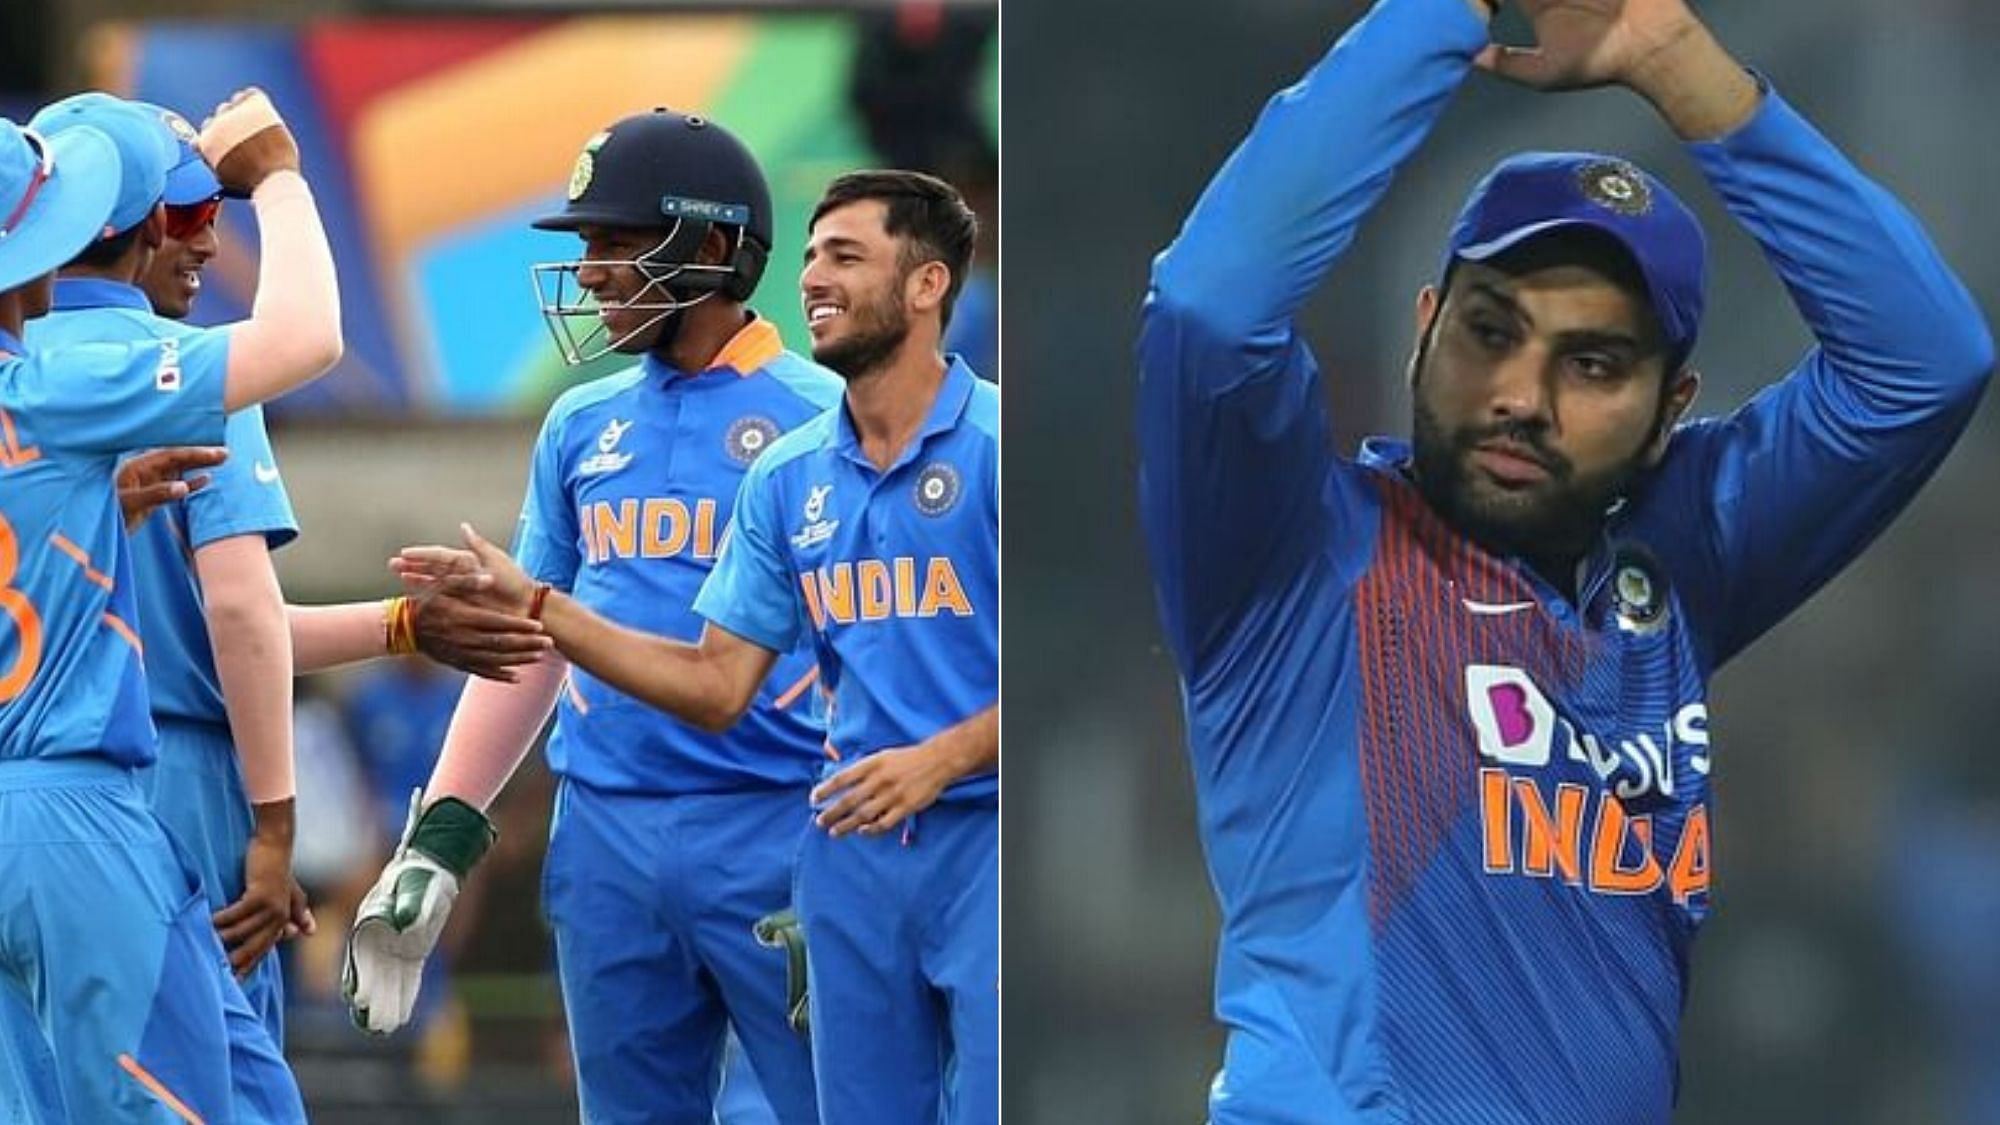 Rohit Sharma has wished luck to the Under-19 Indian team currently participating in the World Cup and is hoping that the Priyam Garg-led side will be able to defend the title and “bring it back”.